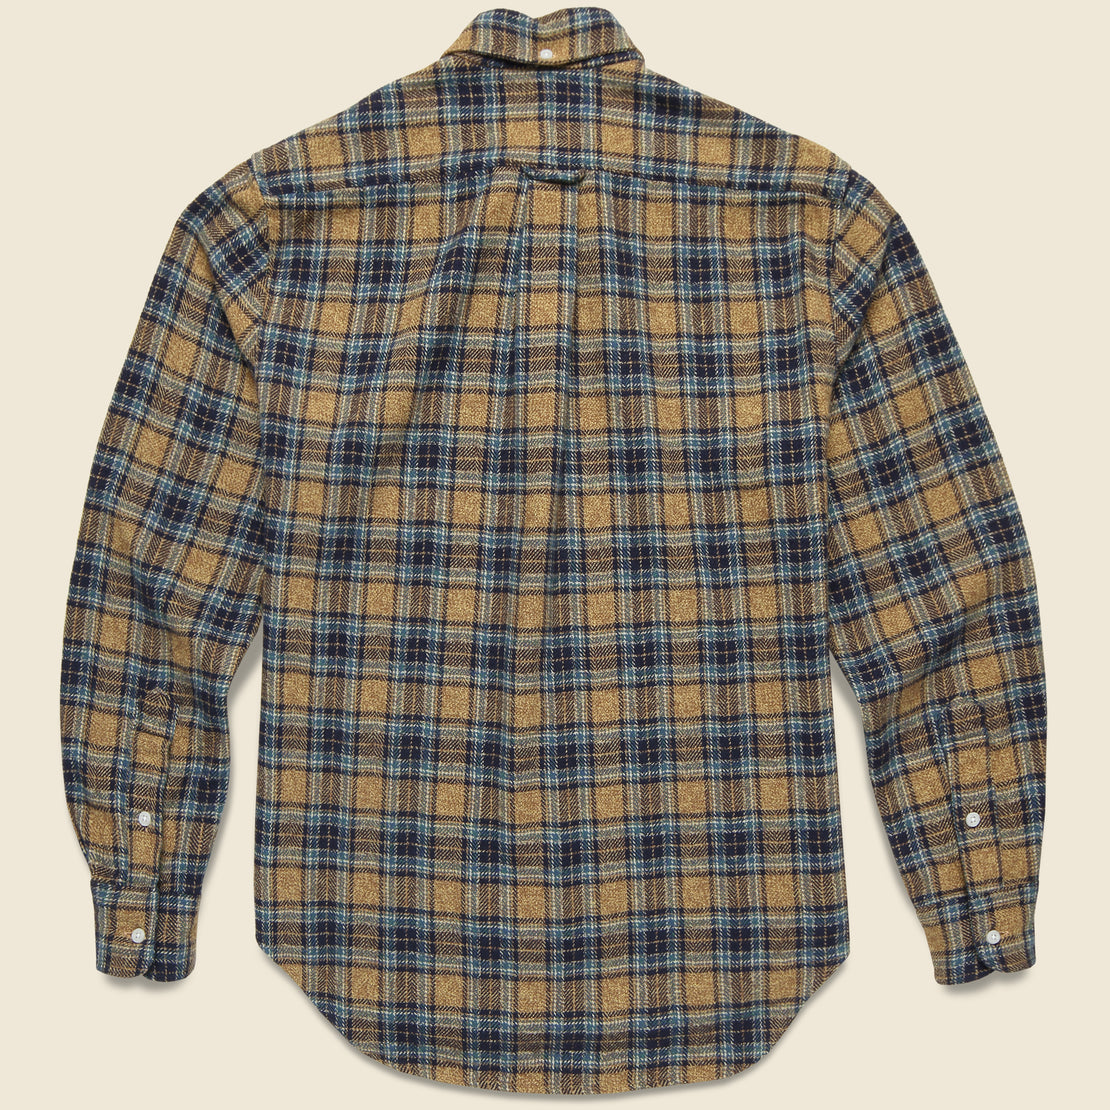 Cotton Tweed Check Flannel - Tan - Gitman Vintage - STAG Provisions - Tops - L/S Woven - Plaid